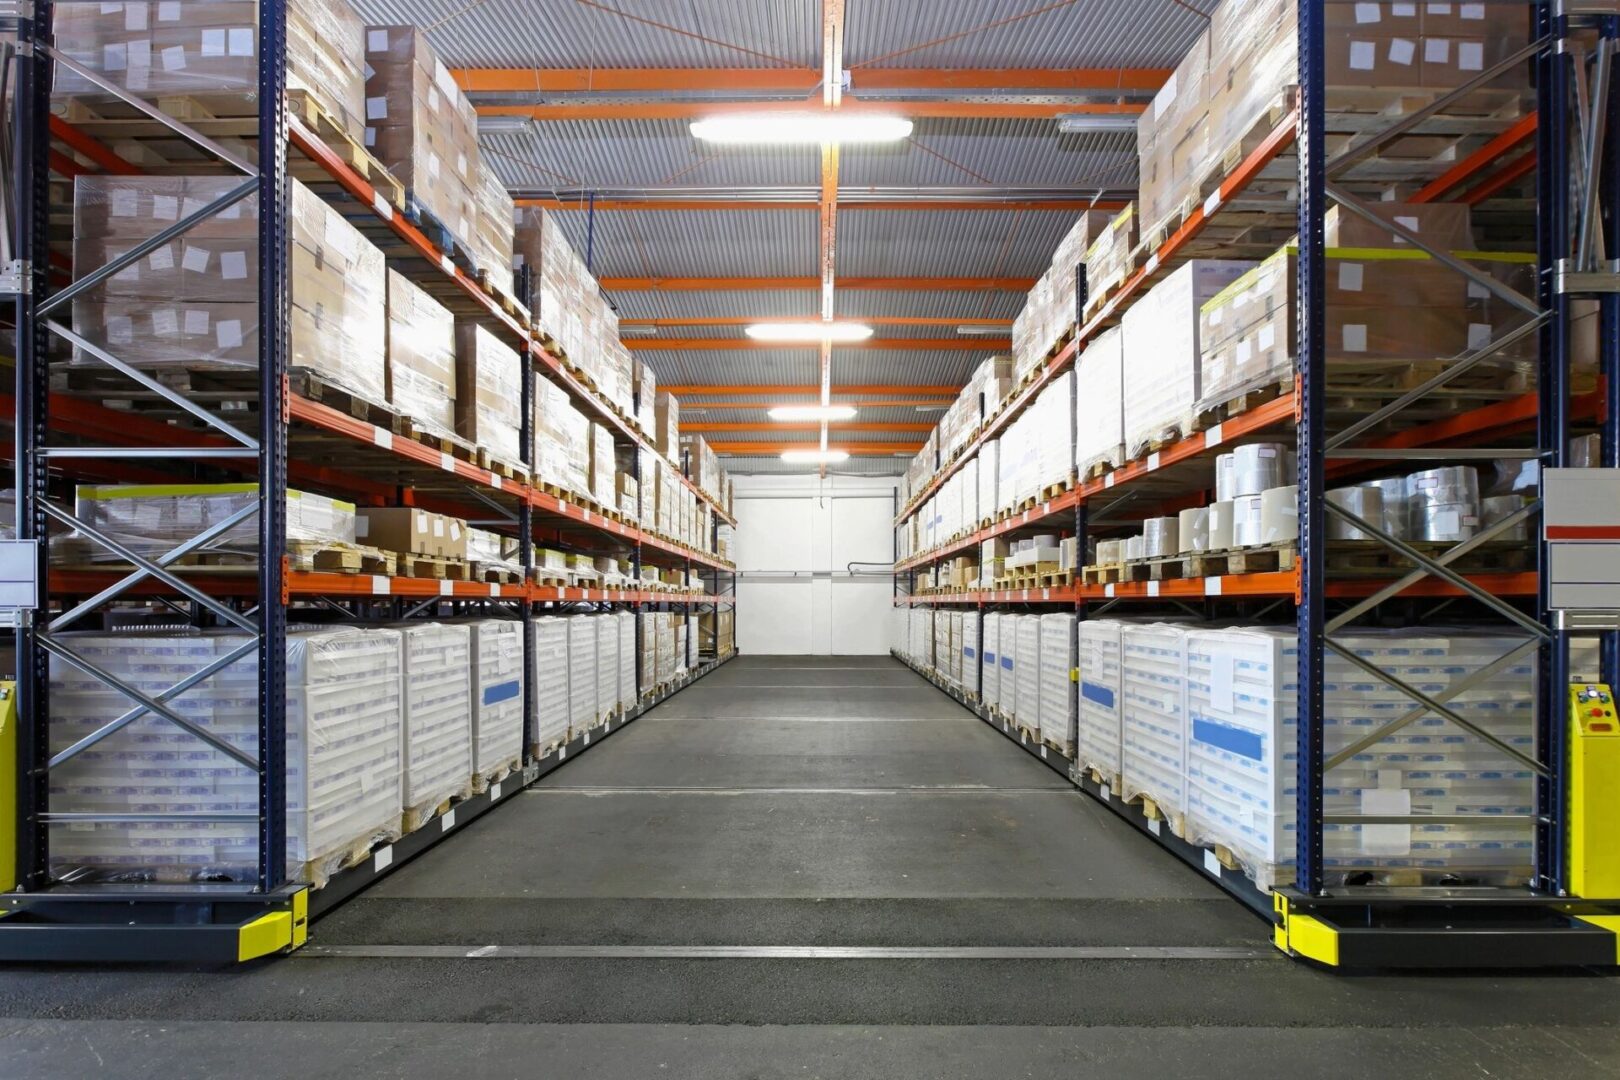 A warehouse with many shelves of boxes and packages.